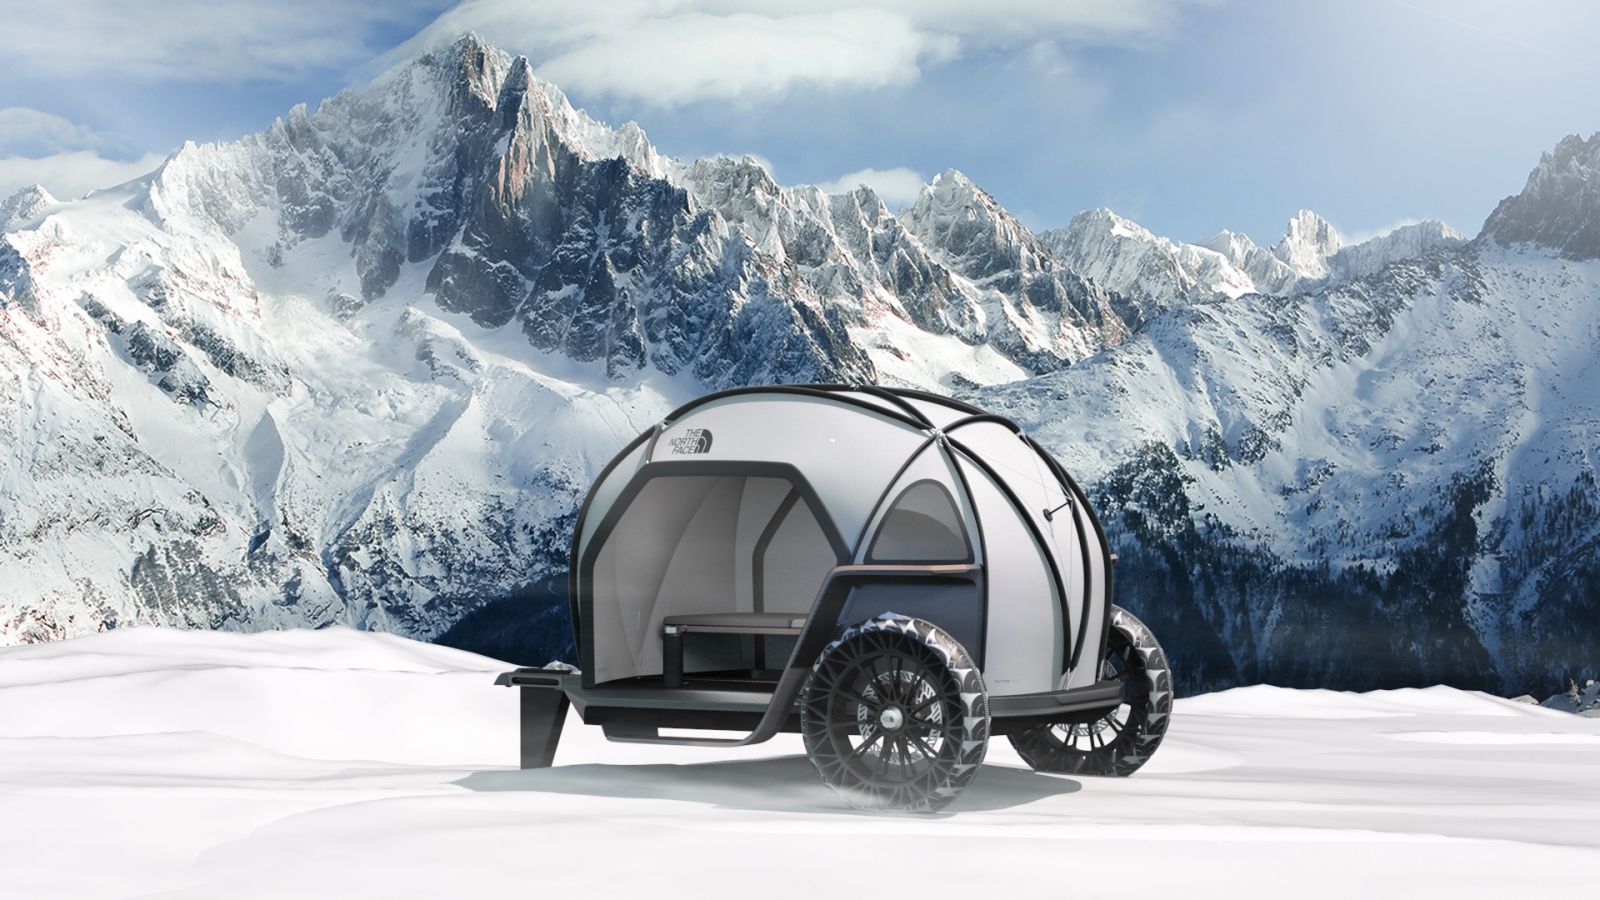 The North Face Camper in Snow